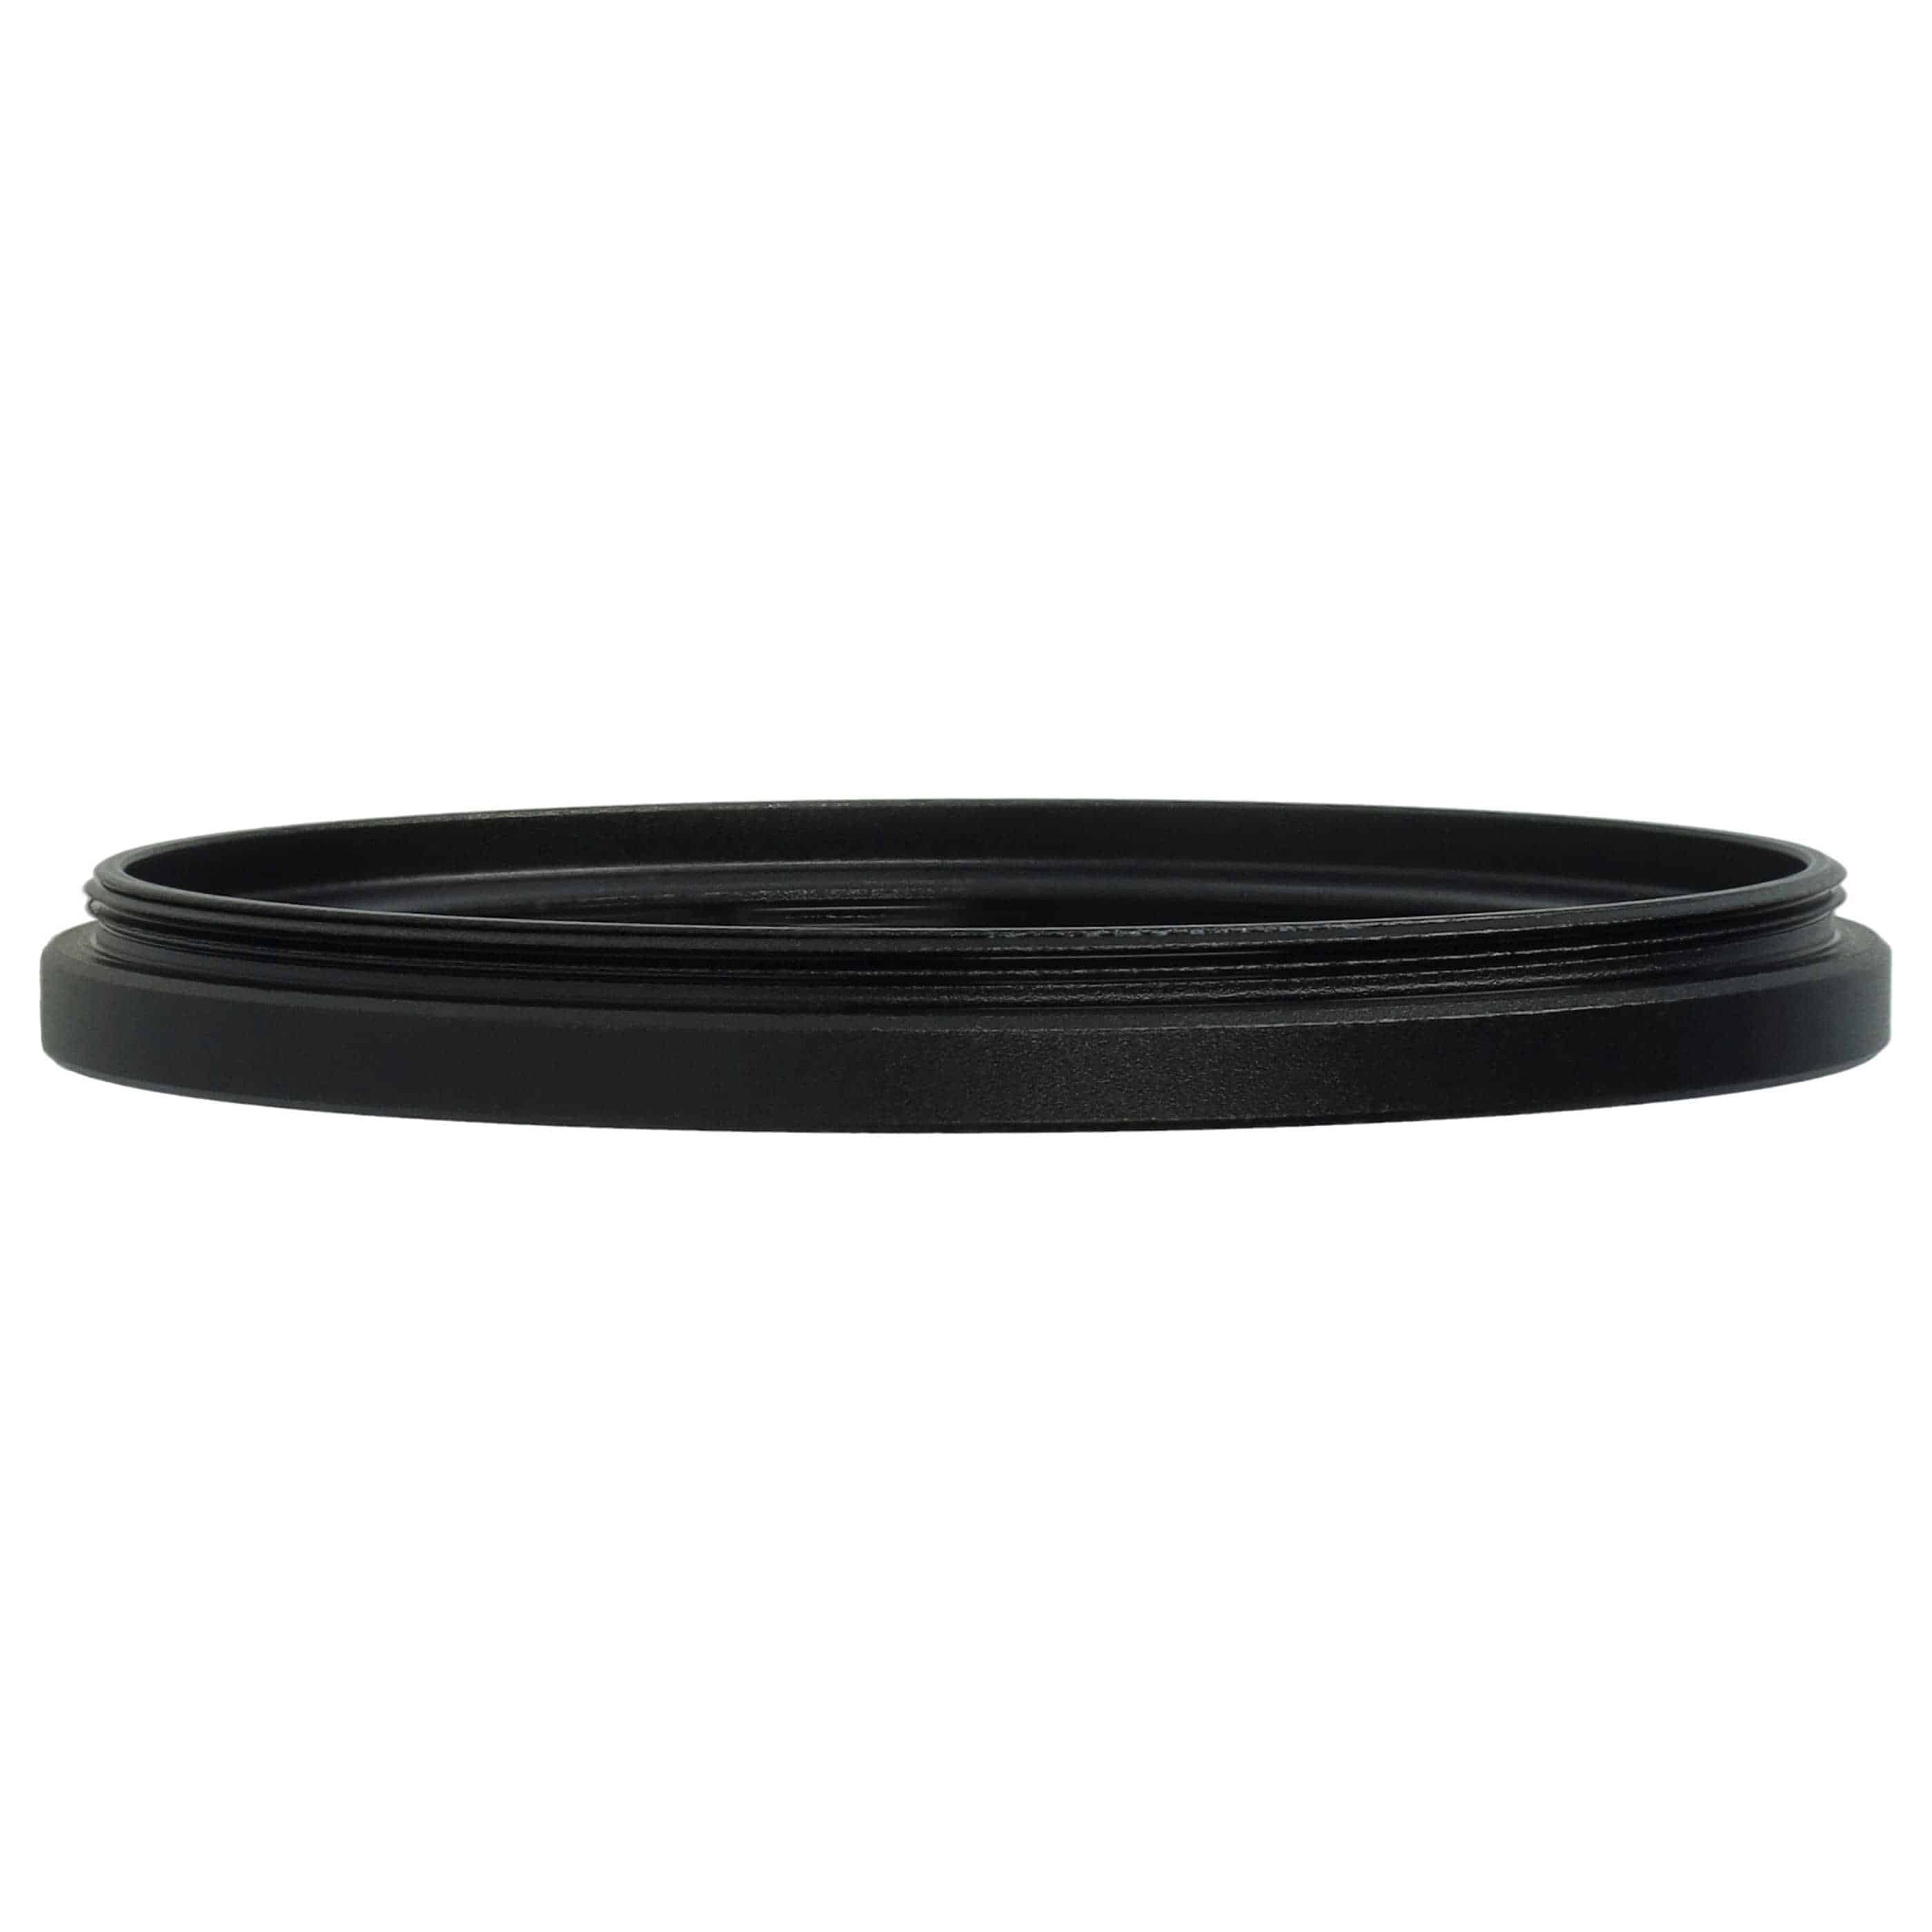 Step-Down Ring Adapter from 58 mm to 46 mm suitable for Camera Lens - Filter Adapter, metal